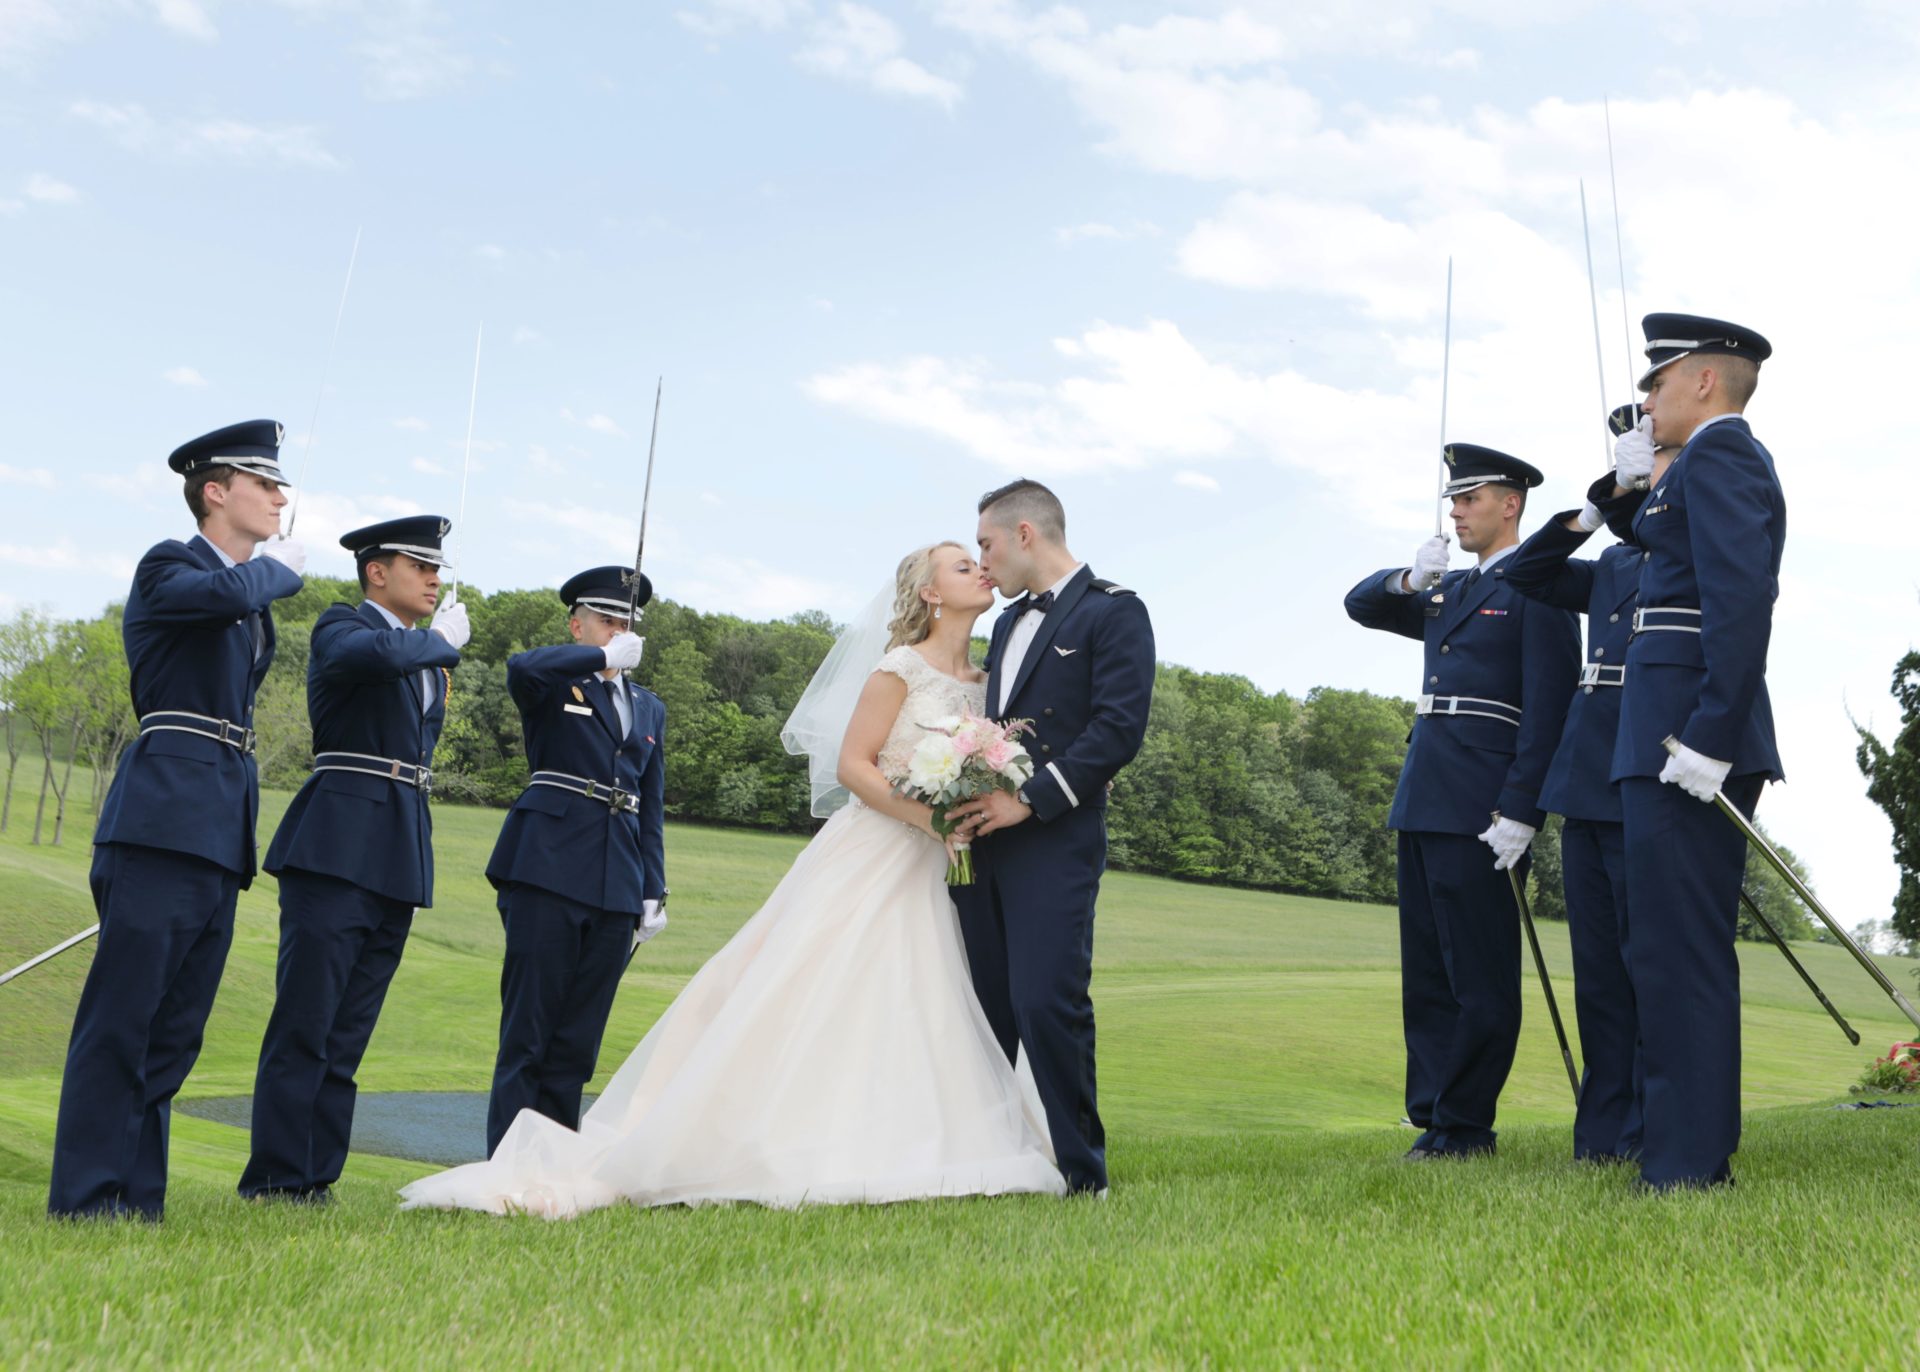 Military salute after spring wedding in Frederick Maryland, tea party theme wedding